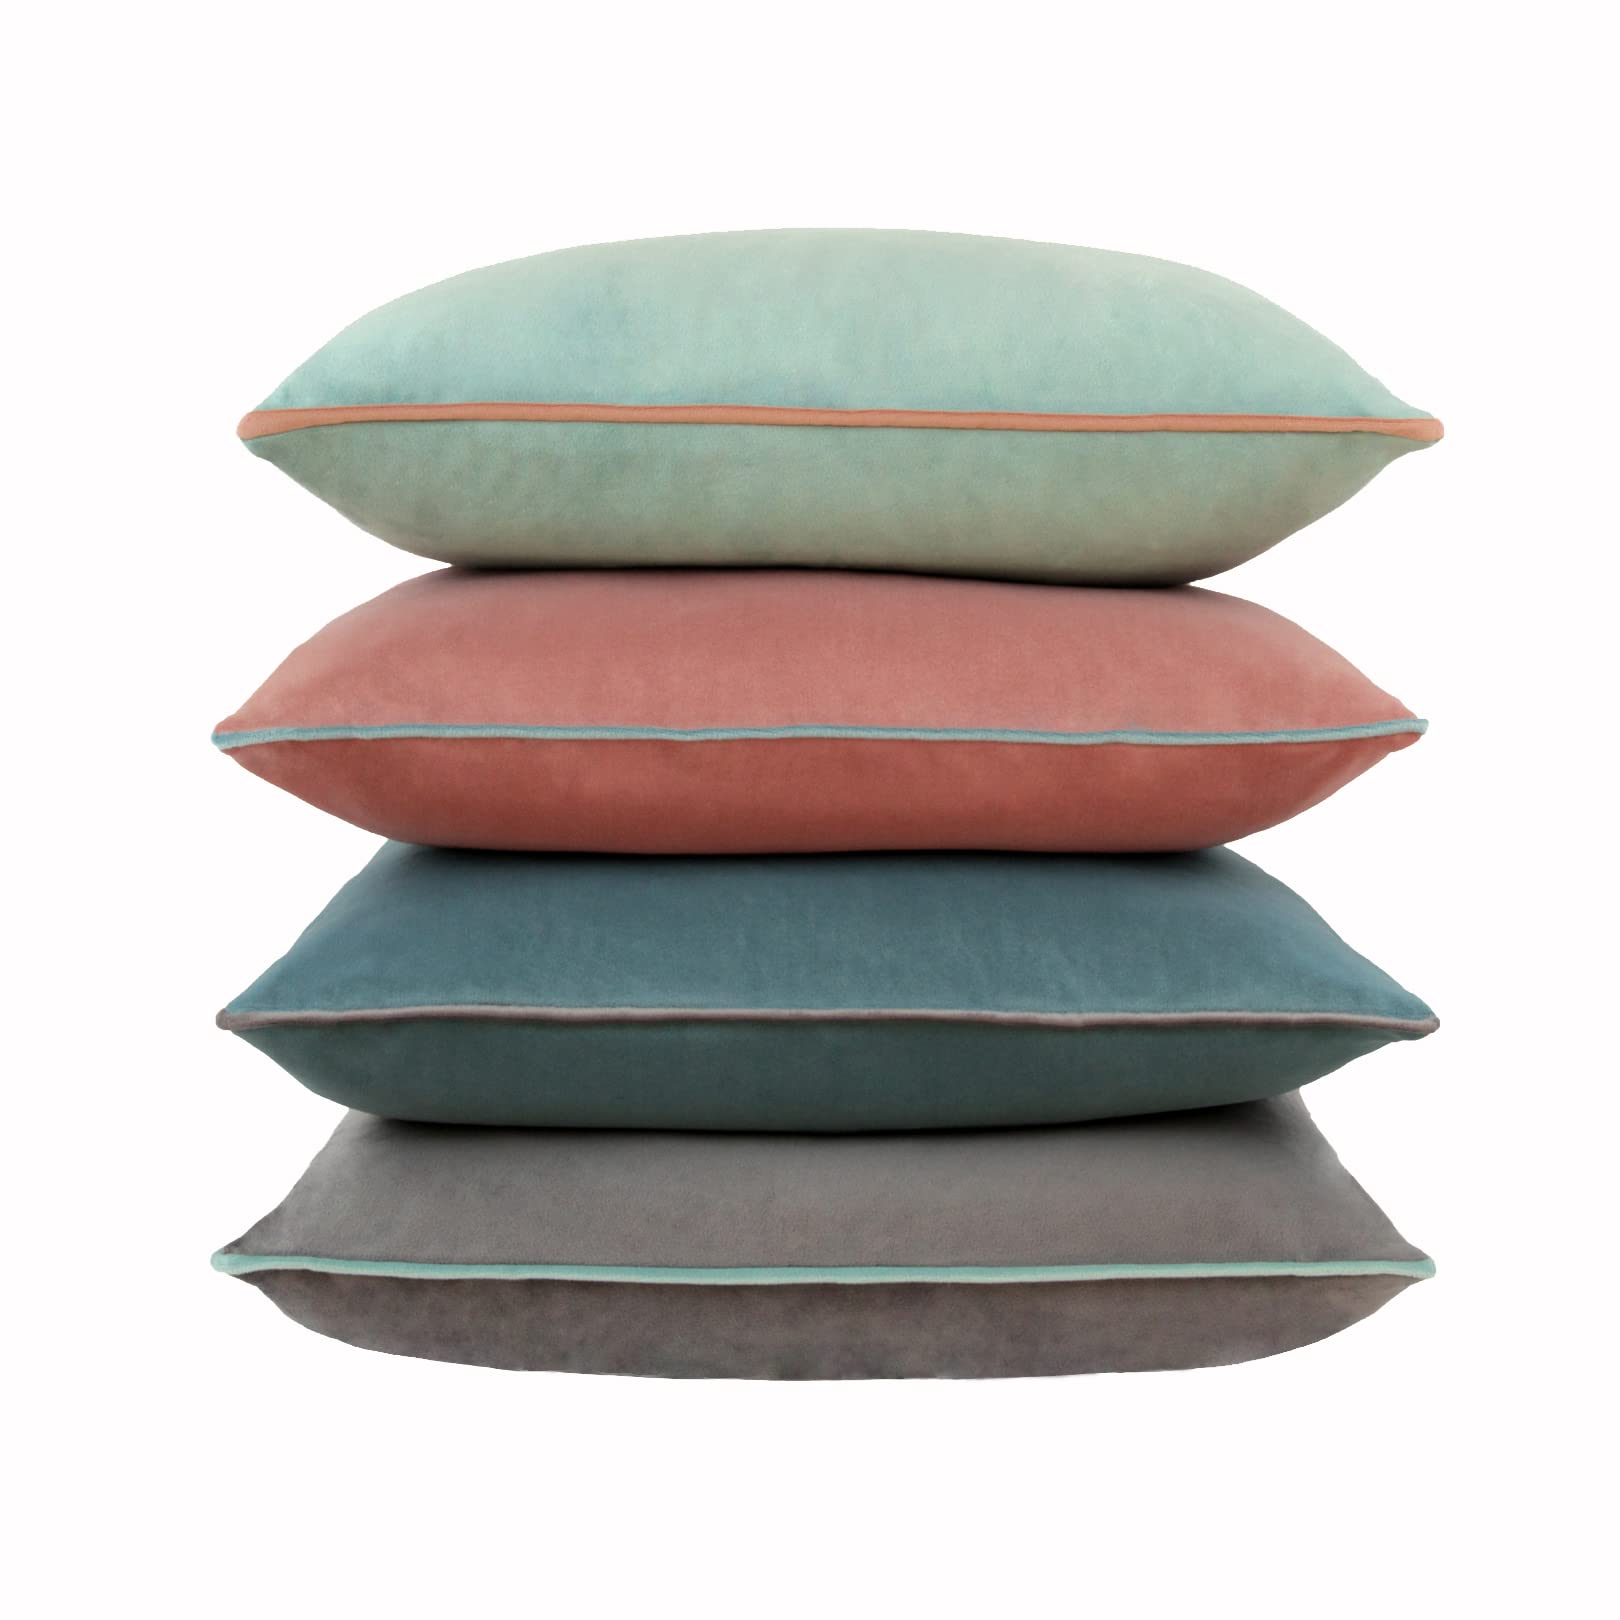 Btyrle Velvet Cushion Covers 18x18 Inch Pack of 4 Decorative Throw Pillow Cover Contrasting Color Edges Soft Pillowcases with Invisible Zipper for Sofa and Couch 45x45cm